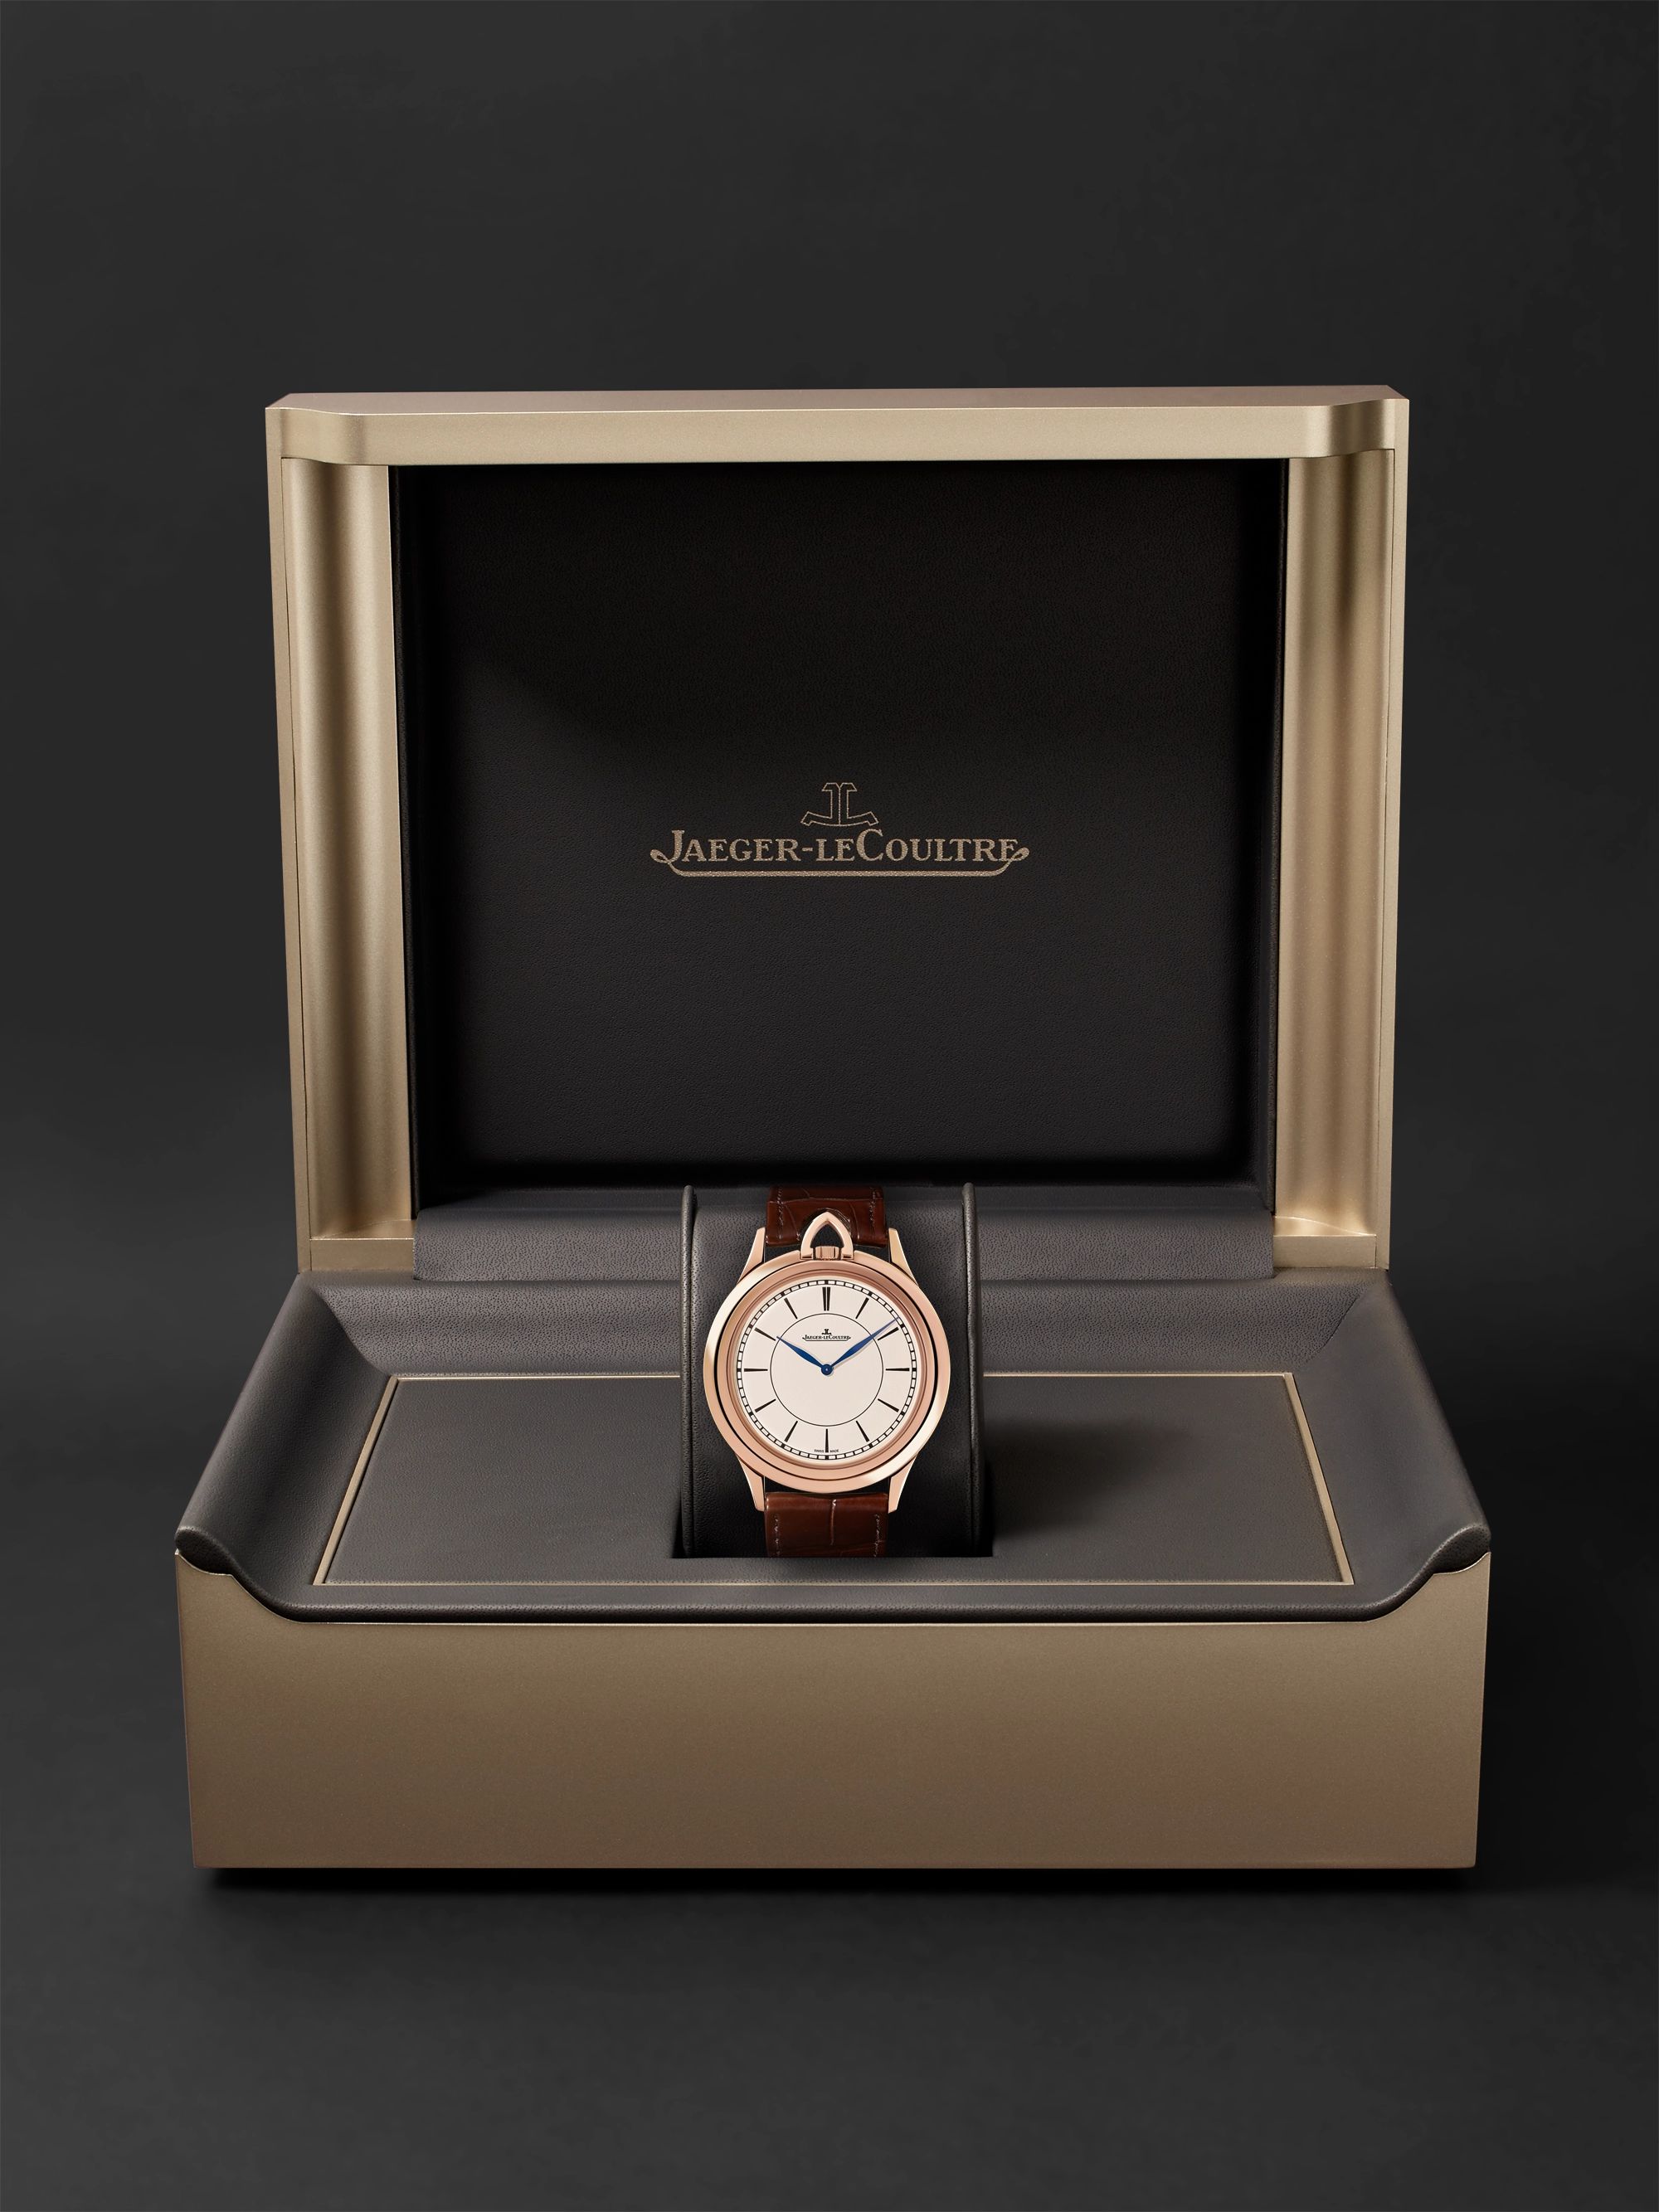 JAEGER-LECOULTRE Limited Edition Master Ultra Thin Kingsman Knife 18-Karat Rose Gold and Alligator Watch, Ref. No. 3402393